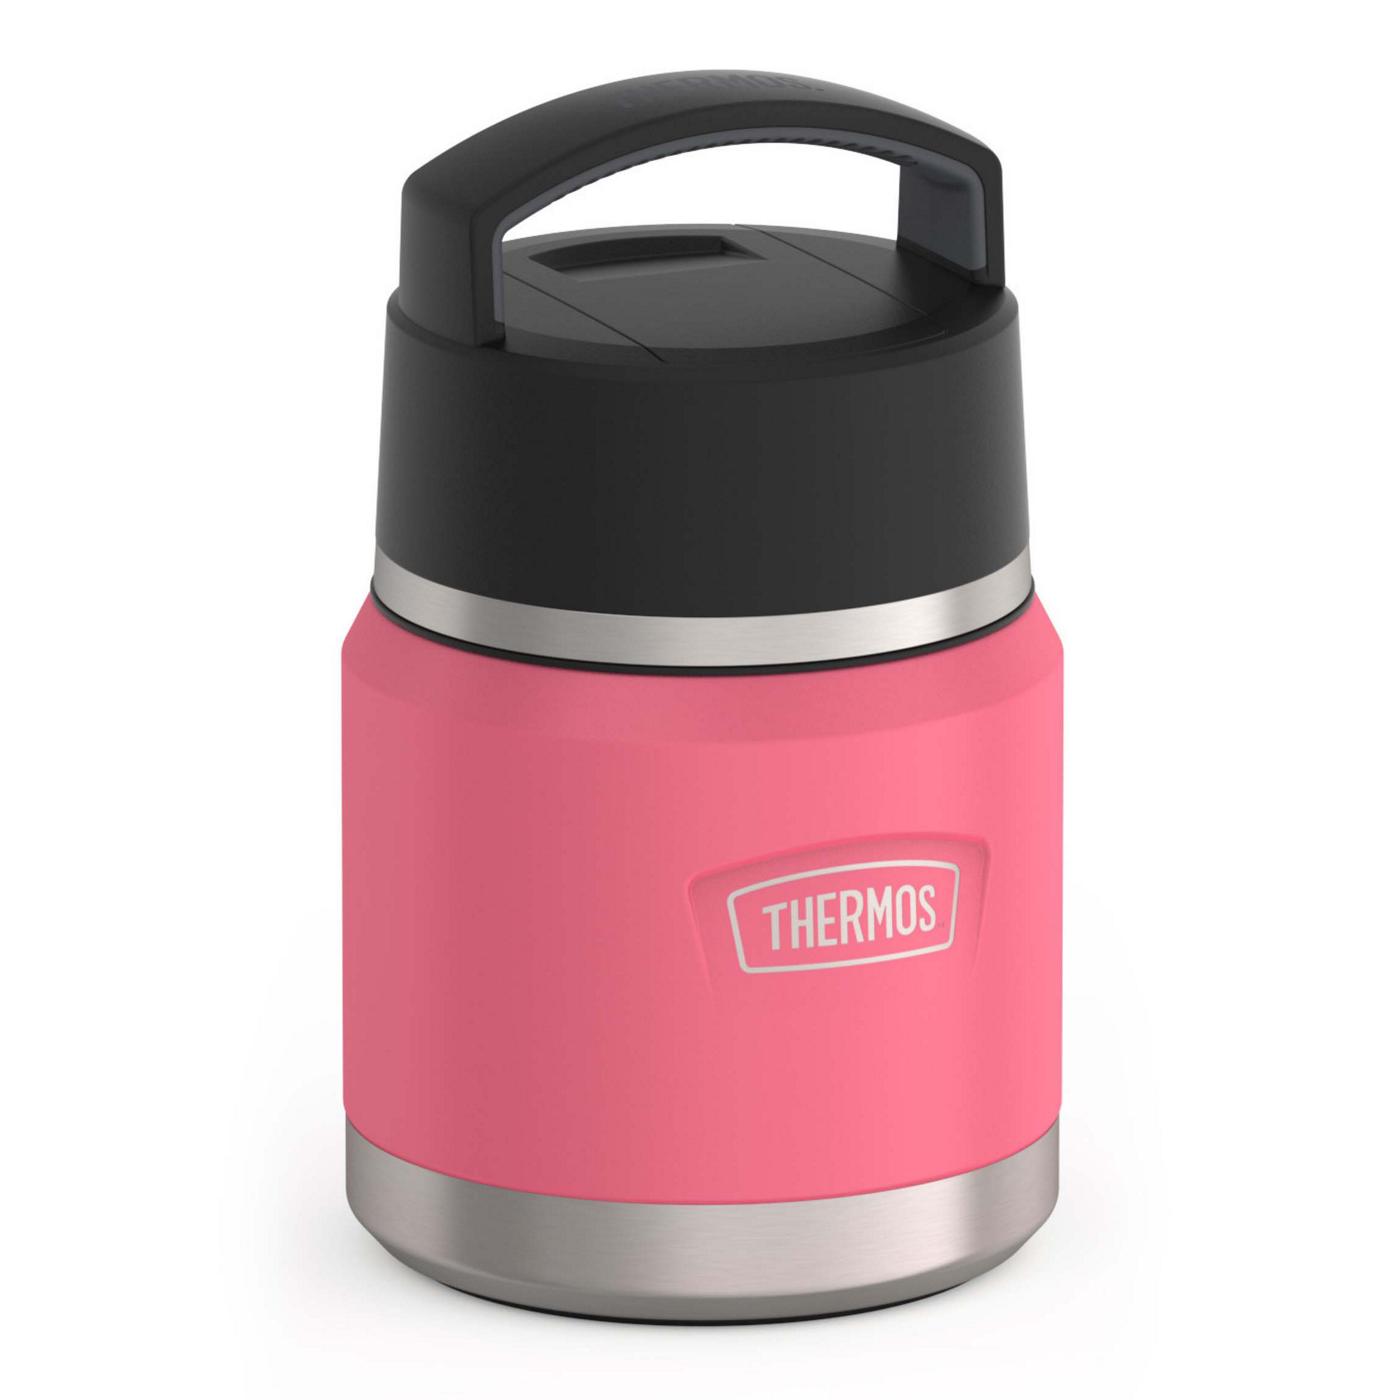 Thermos Icon Series Food Jar - Pink; image 6 of 6